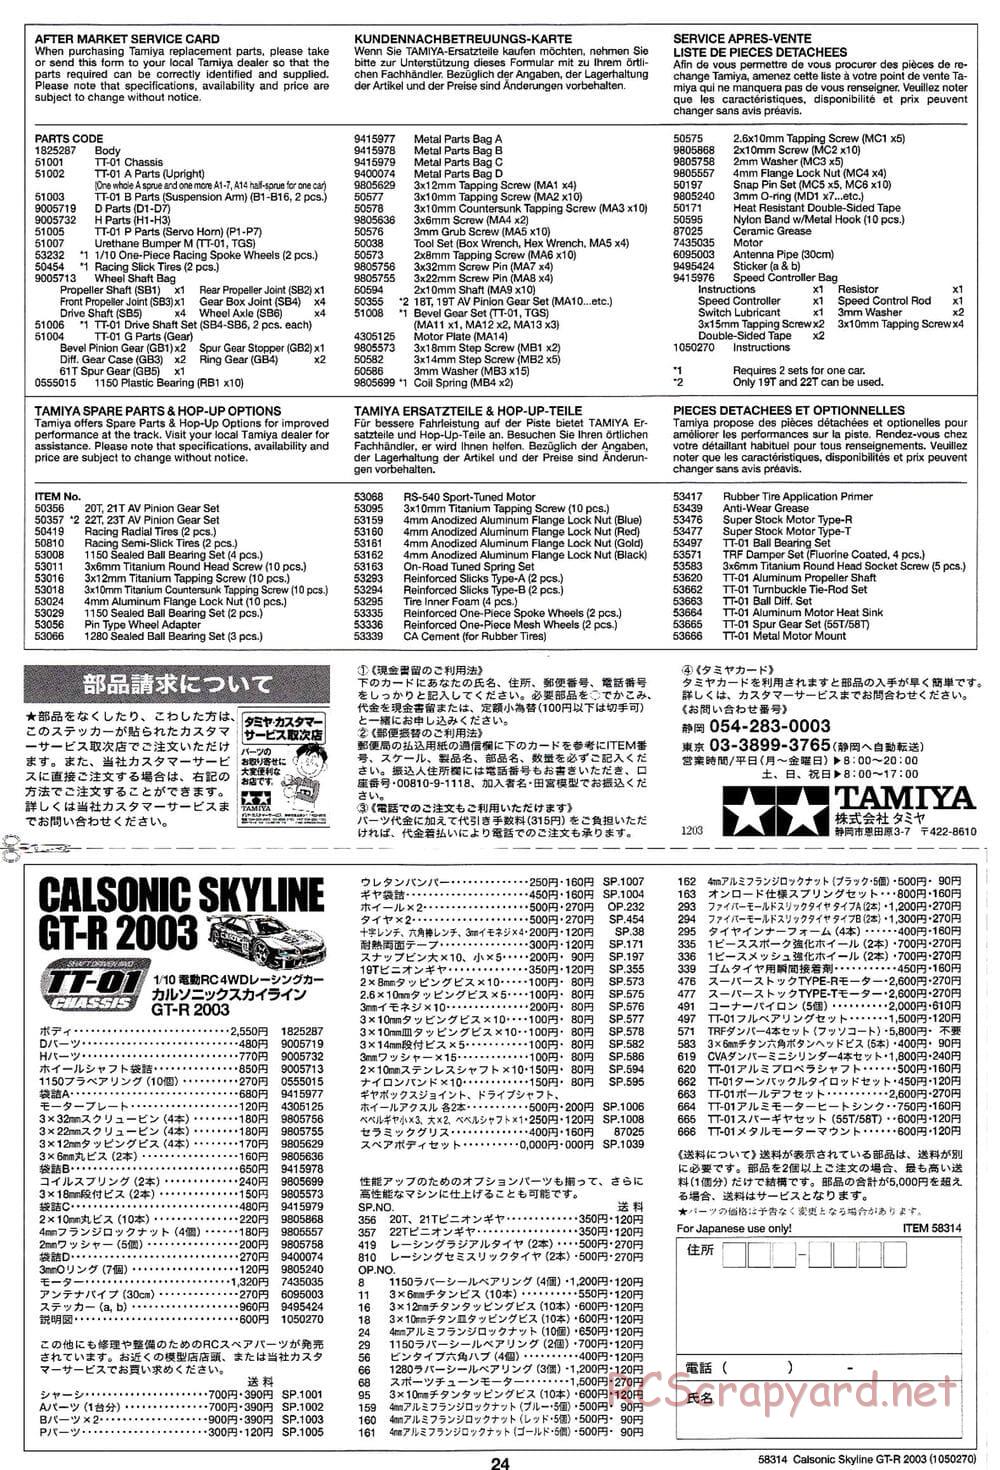 Tamiya - Calsonic Skyline GT-R 2003 - TT-01 Chassis - Manual - Page 24